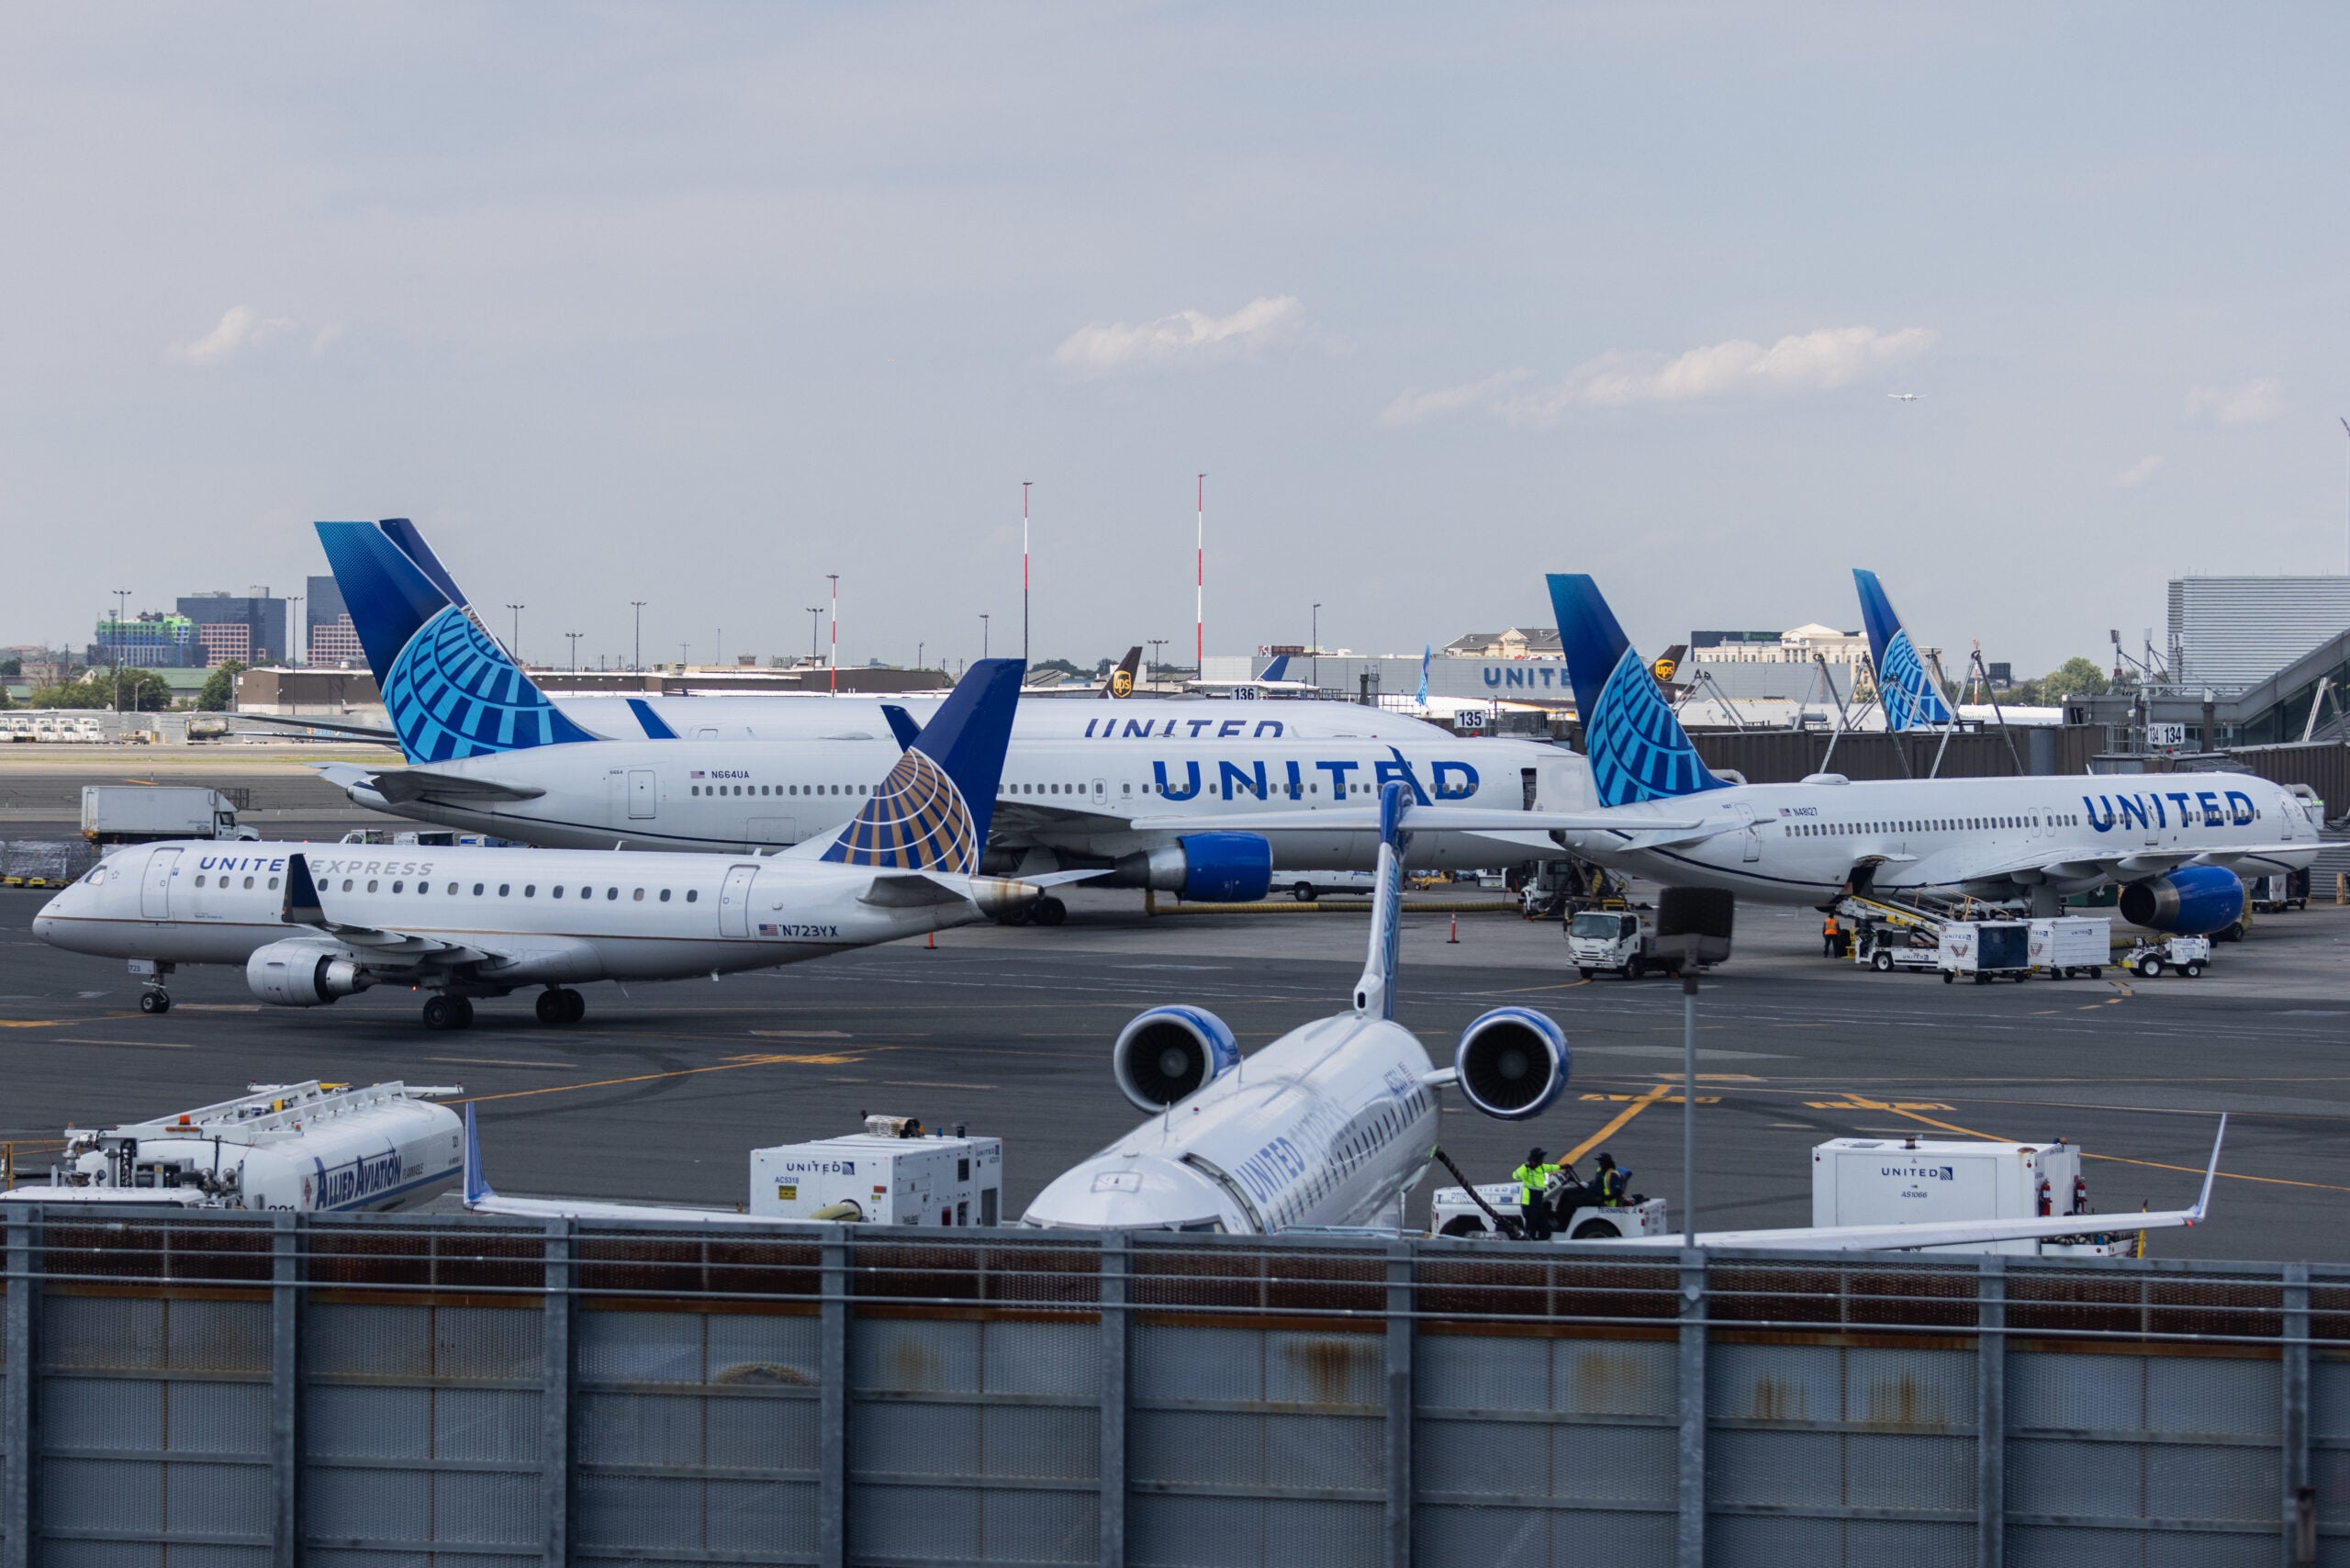 United planes on the ground at Newark airport